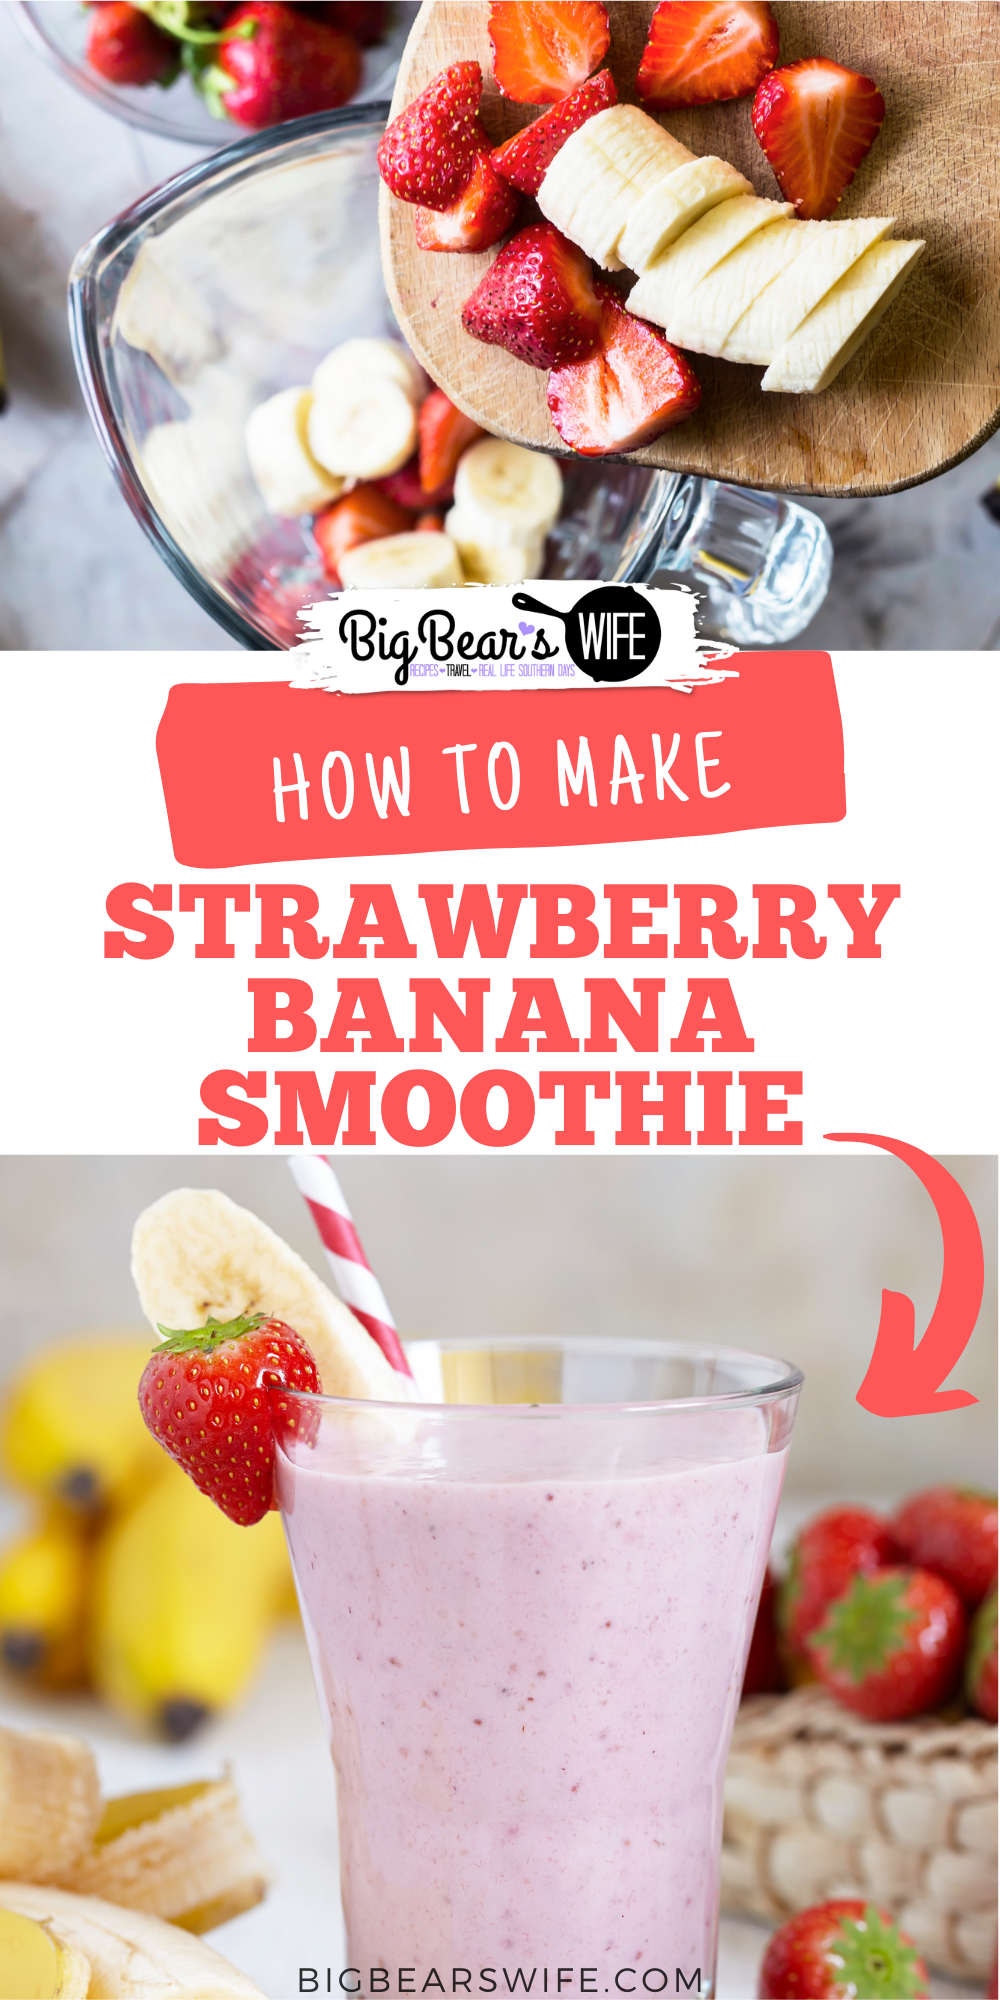 This 4 ingredient Strawberry Banana Smoothie is so easy to make and it makes for the perfect breakfast or afternoon treat!  via @bigbearswife